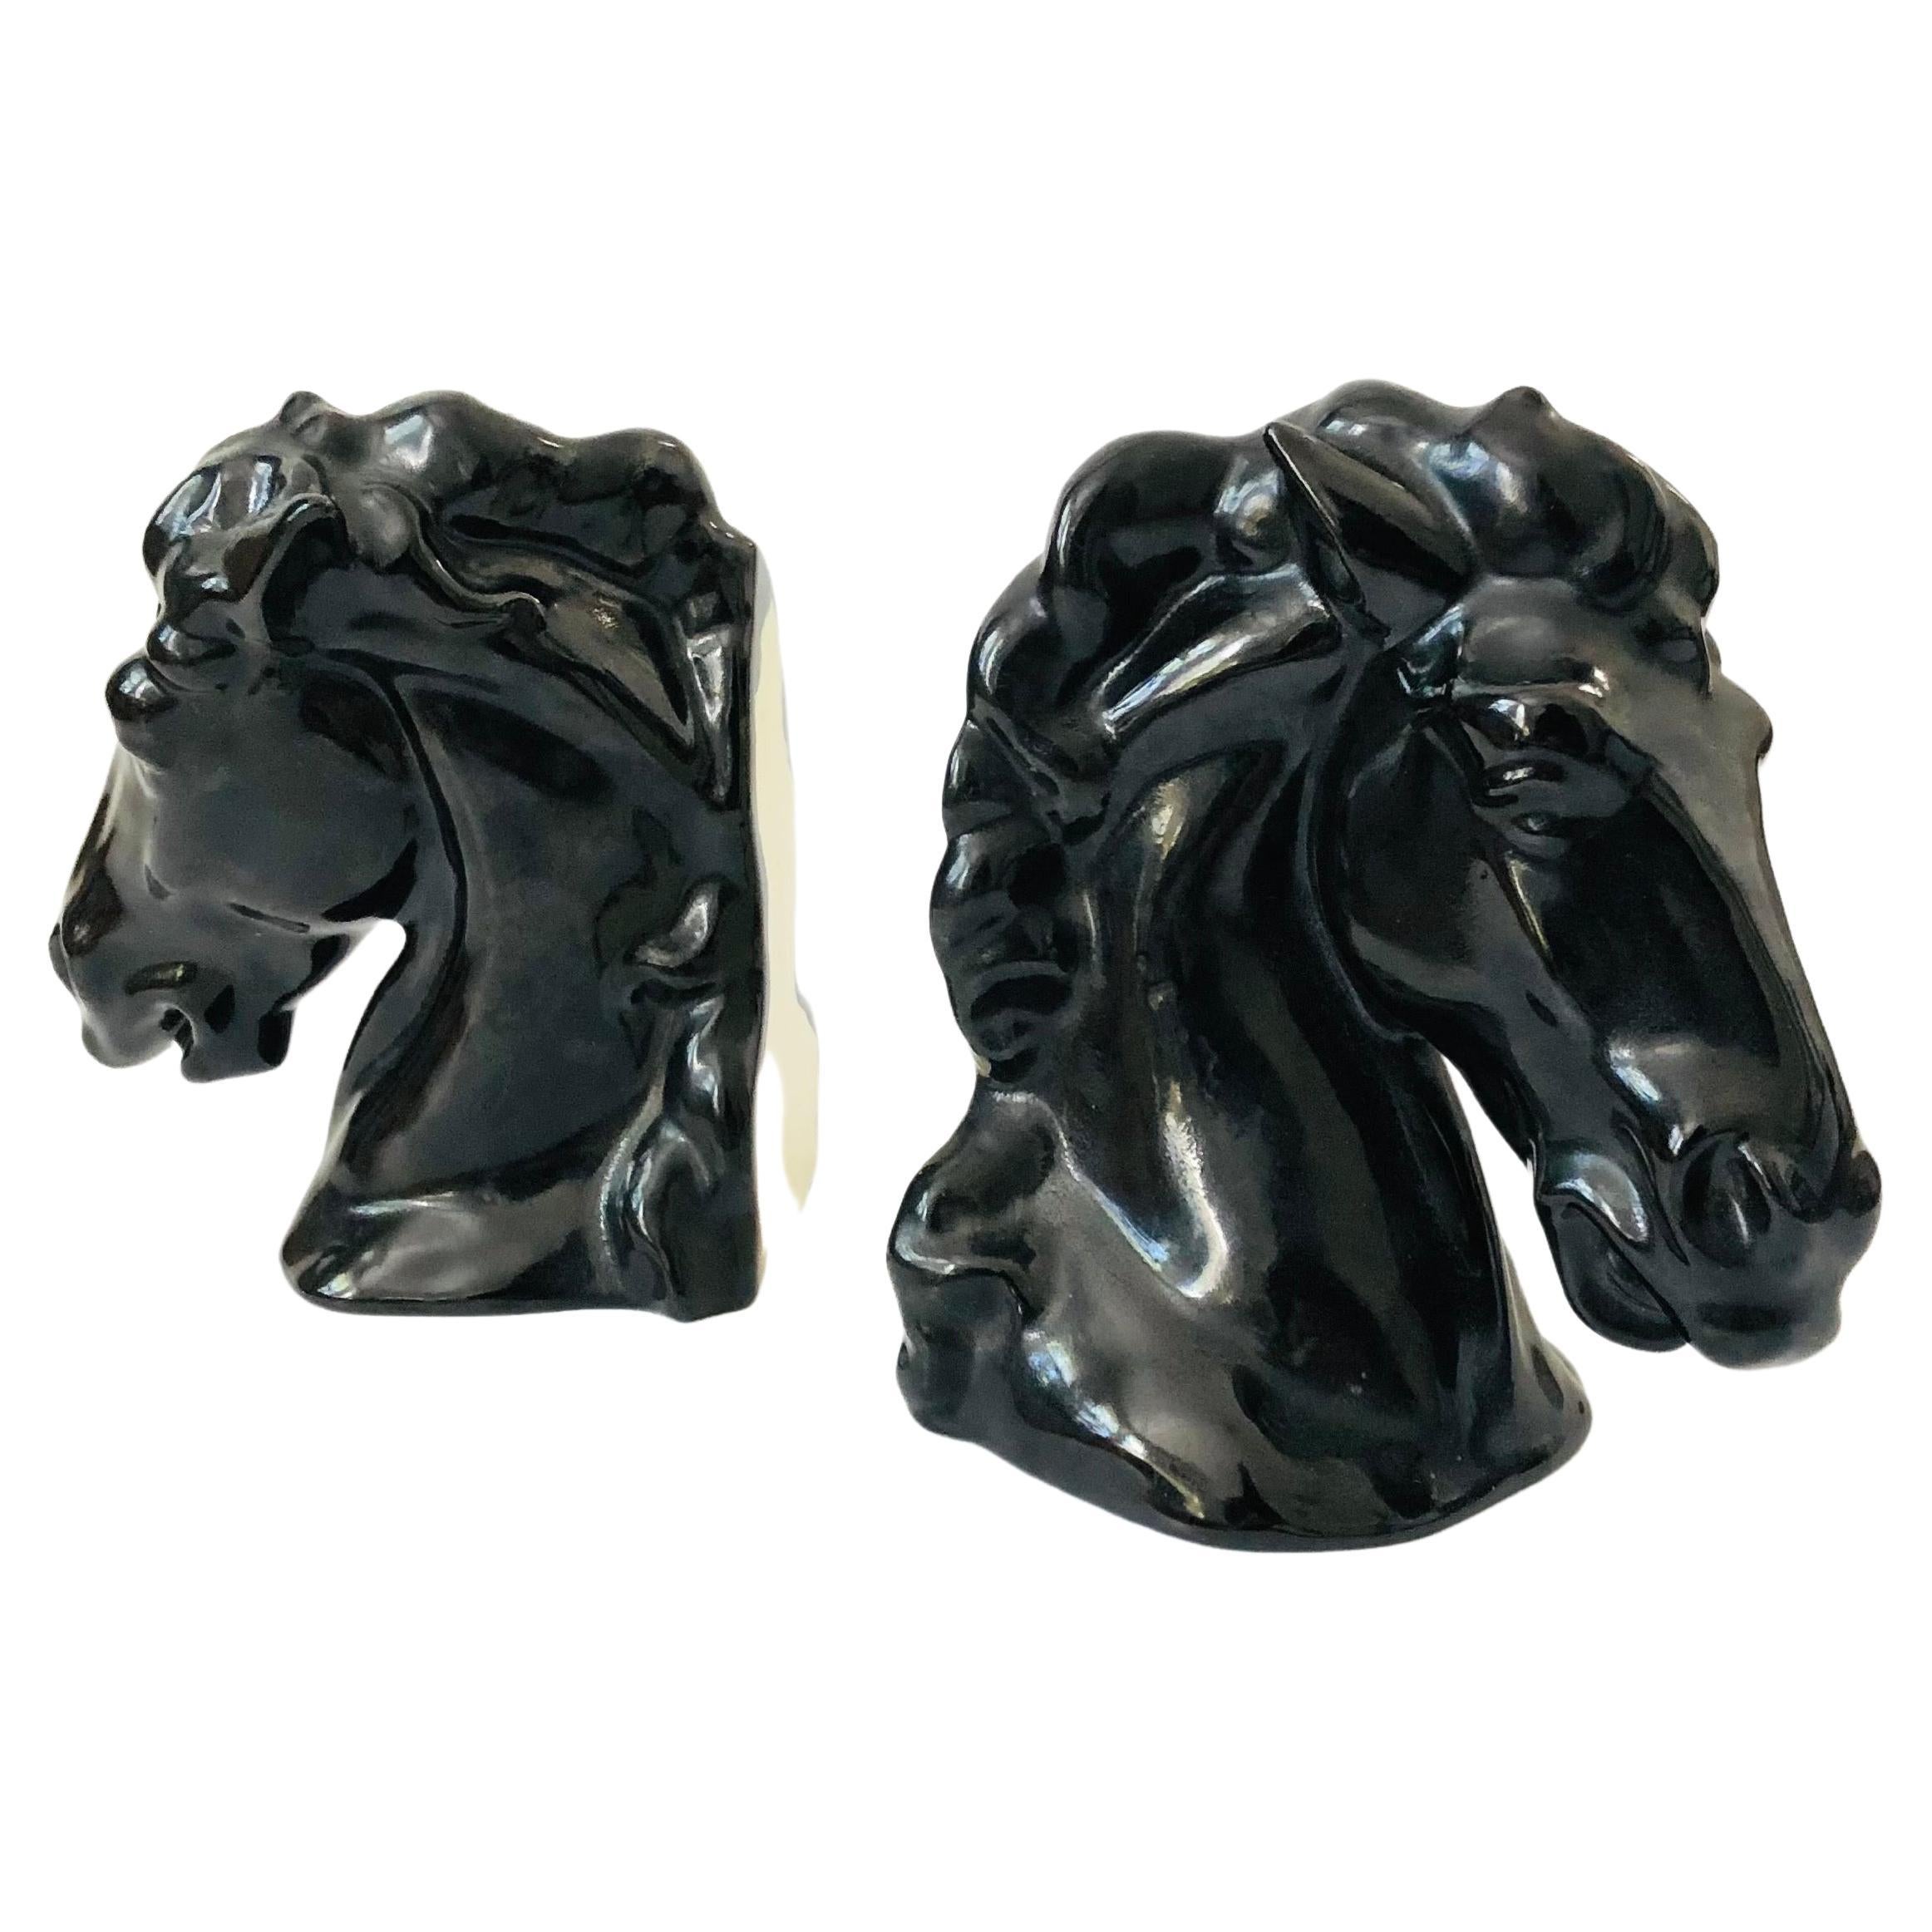 Dollhouse Miniature Metal Horse Bookends with Antique Finish S1517A 